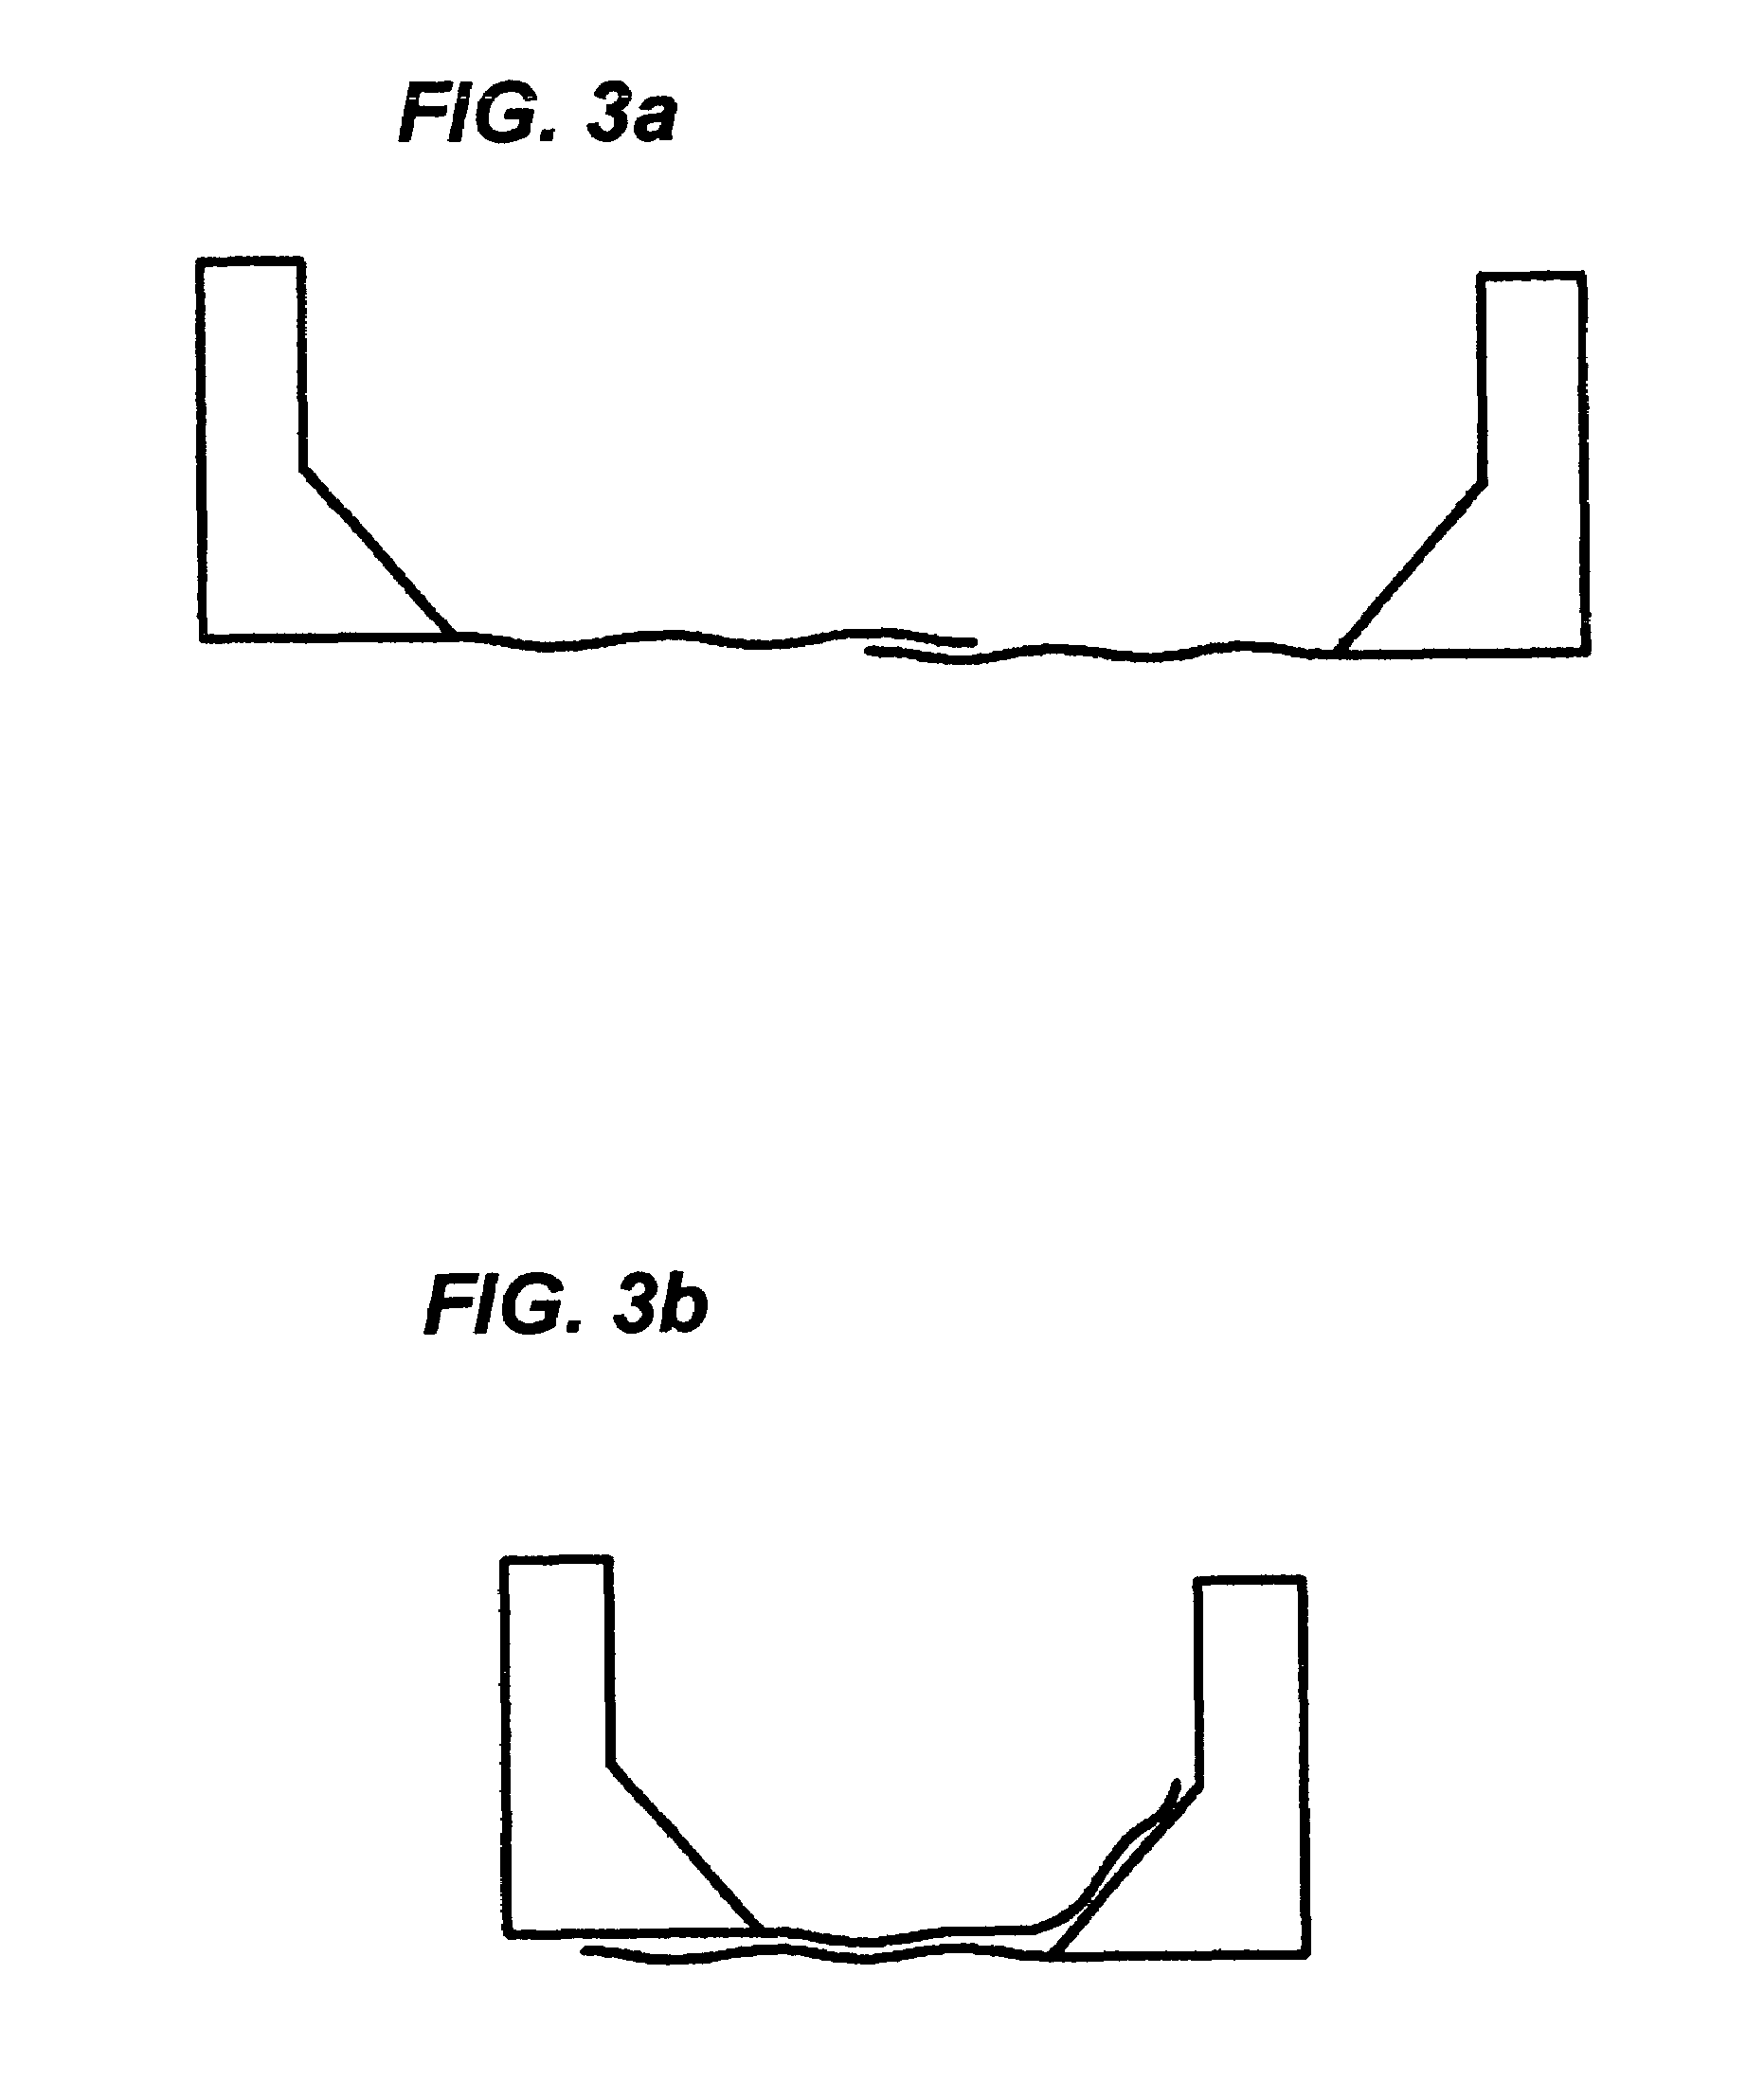 Lateral confinement device for use in children's bed